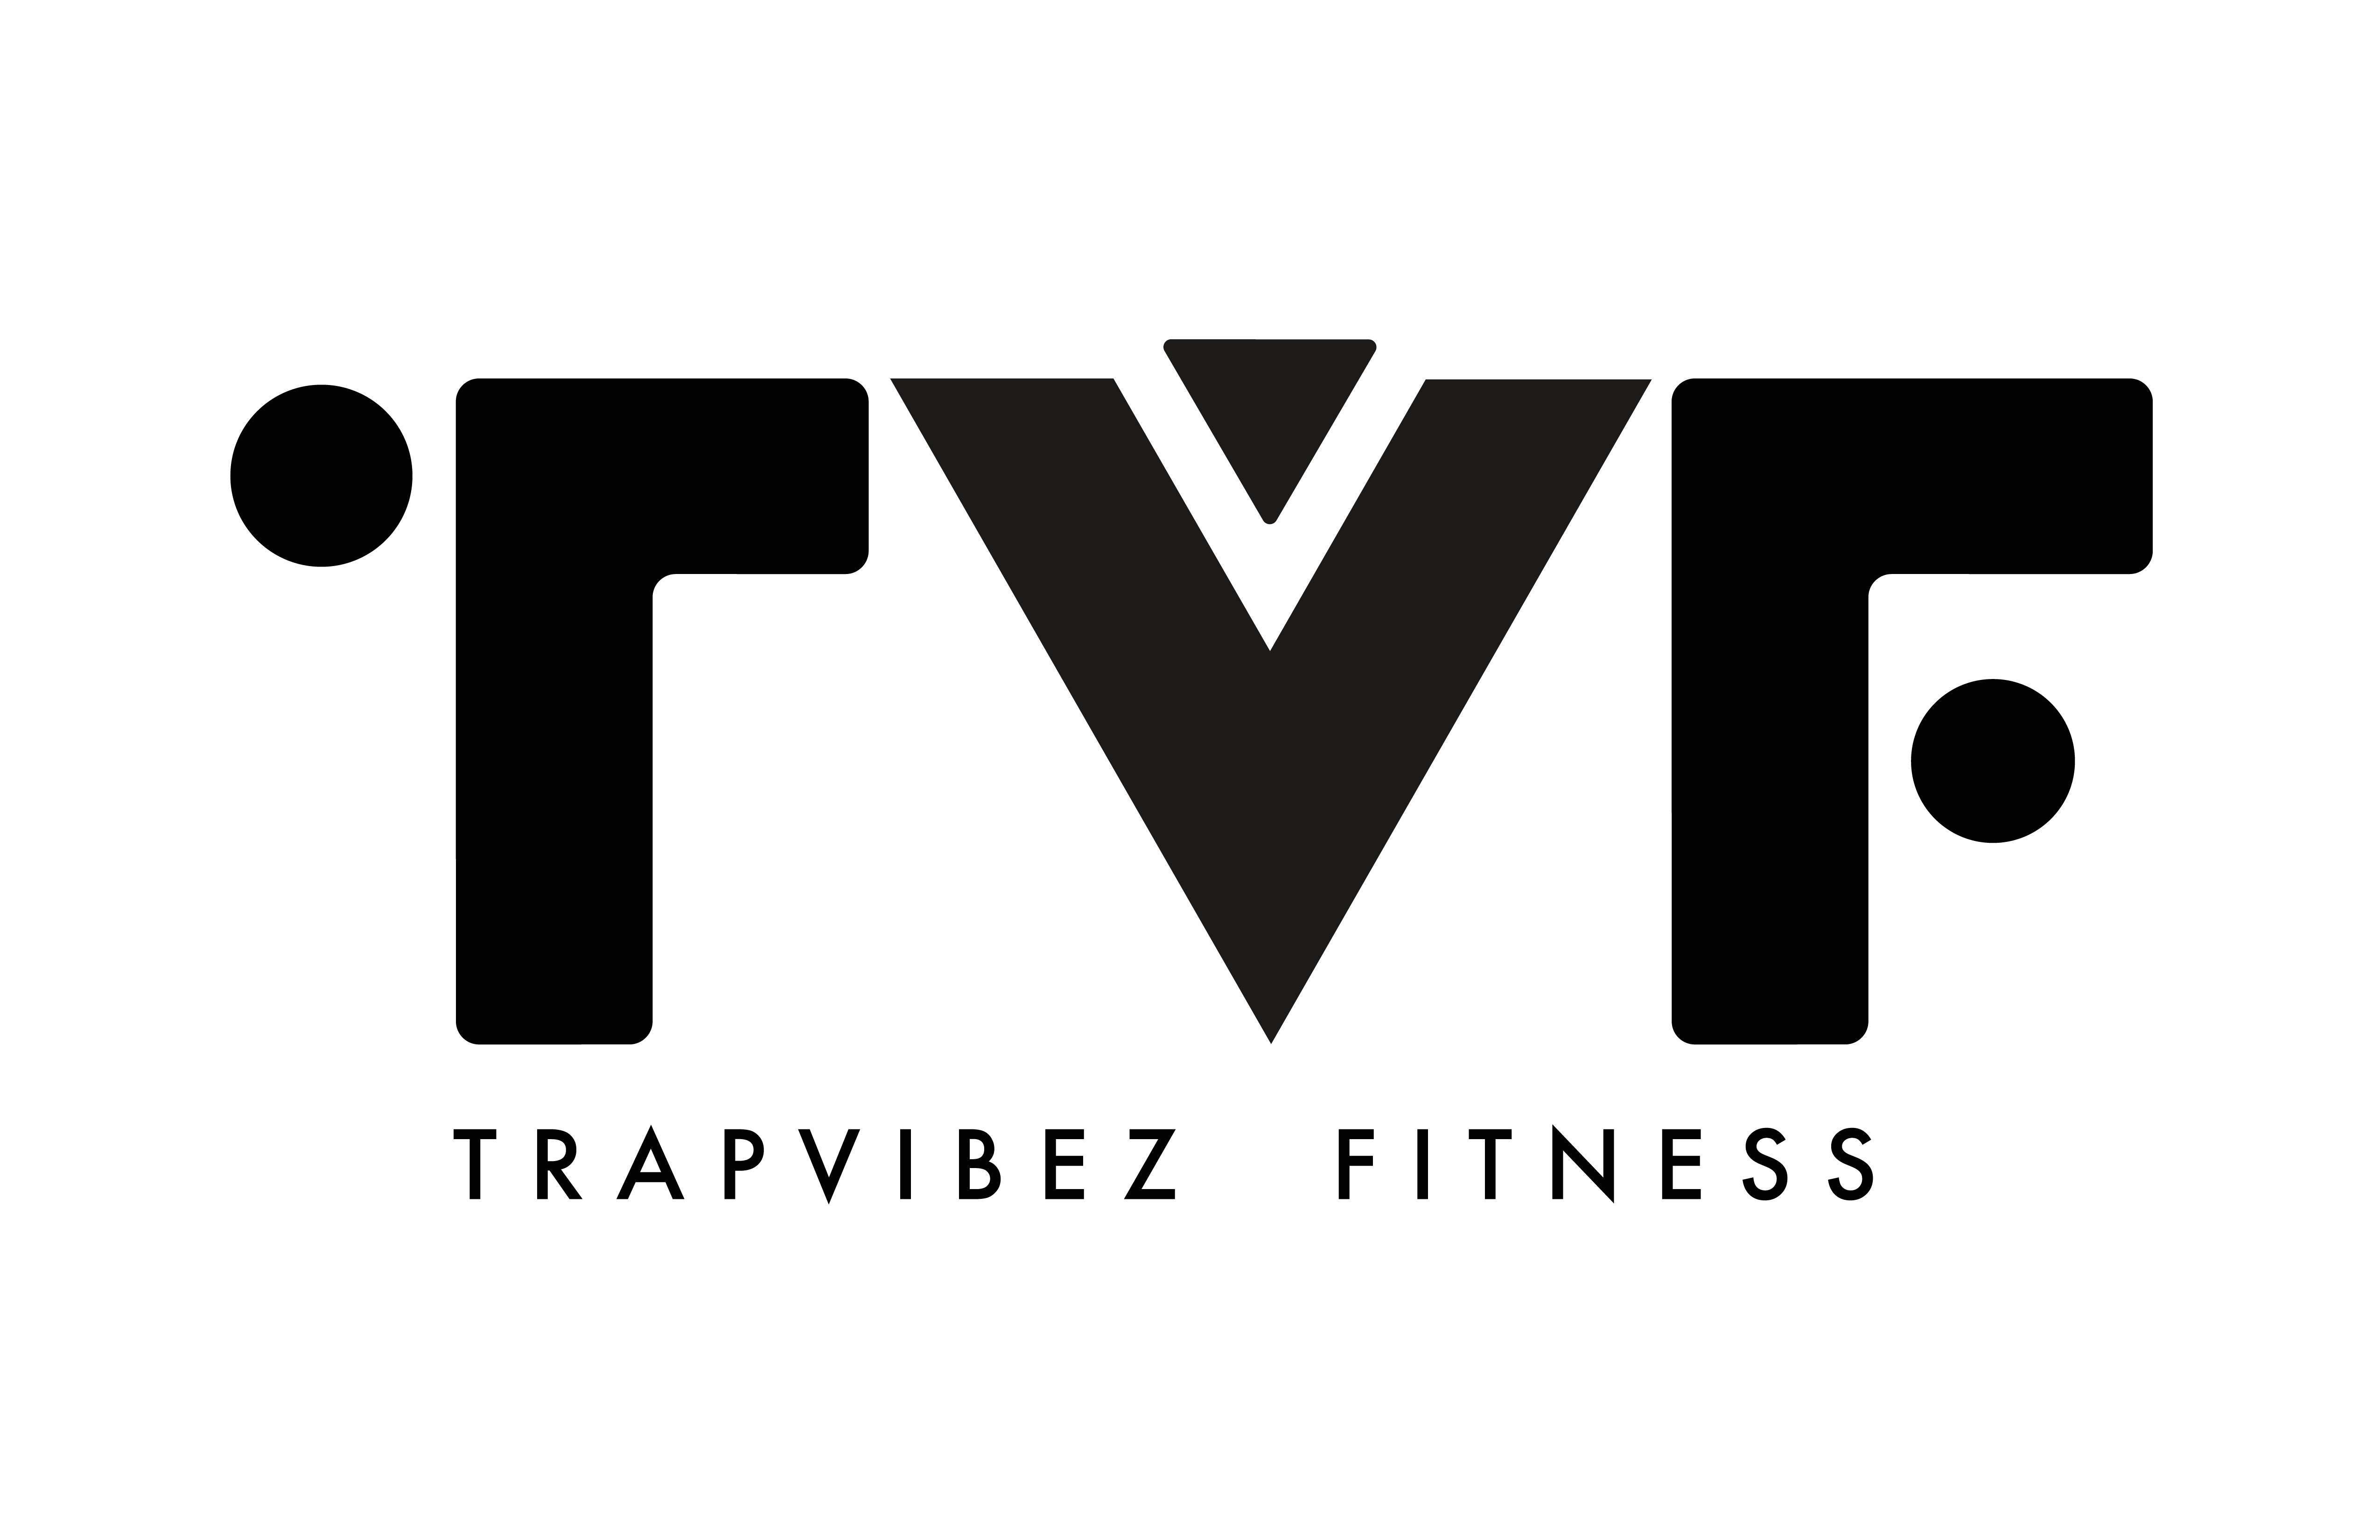 The logo or business face of "TRAPVIBEZ Fitness"